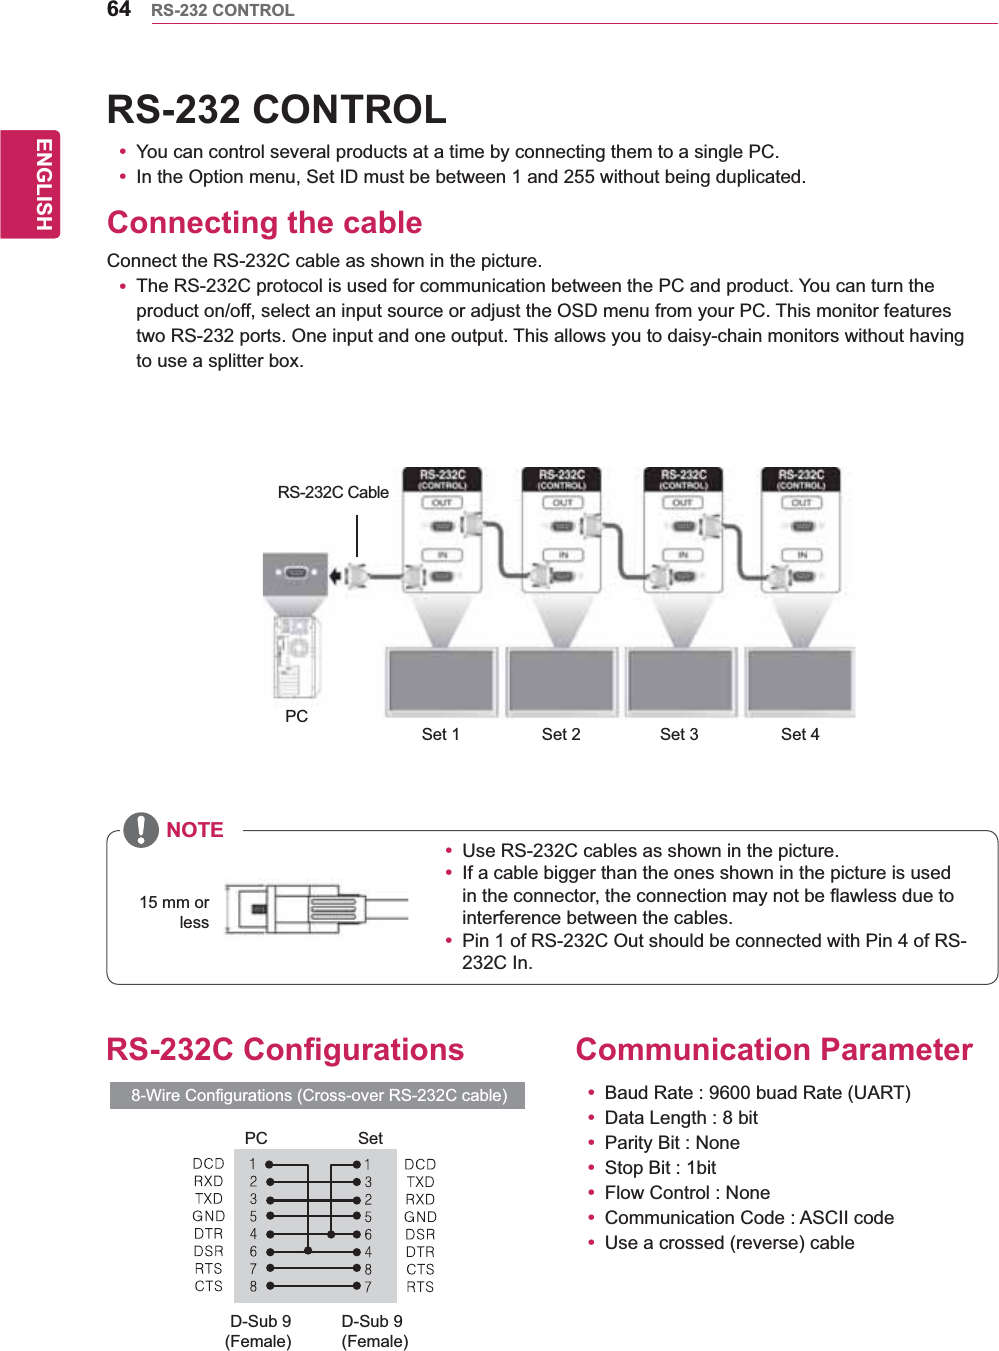 64ENGENGLISHRS-232 CONTROLRS-232 CONTROLy You can control several products at a time by connecting them to a single PC.y In the Option menu, Set ID must be between 1 and 255 without being duplicated.Connecting the cableConnect the RS-232C cable as shown in the picture.y The RS-232C protocol is used for communication between the PC and product. You can turn the product on/off, select an input source or adjust the OSD menu from your PC. This monitor features two RS-232 ports. One input and one output. This allows you to daisy-chain monitors without having to use a splitter box.Set 1  Set 2  Set 3 Set 4 PCRS-232C CableNOTE15 mm or lessCommunication Parametery Baud Rate : 9600 buad Rate (UART)y Data Length : 8 bity Parity Bit : Noney Stop Bit : 1bity Flow Control : Noney Communication Code : ASCII codey Use a crossed (reverse) cableRS-232C Configurations8-Wire Configurations (Cross-over RS-232C cable)y Use RS-232C cables as shown in the picture.y If a cable bigger than the ones shown in the picture is used in the connector, the connection may not be flawless due to interference between the cables.y Pin 1 of RS-232C Out should be connected with Pin 4 of RS-232C In.PC SetD-Sub 9 (Female)D-Sub 9(Female)